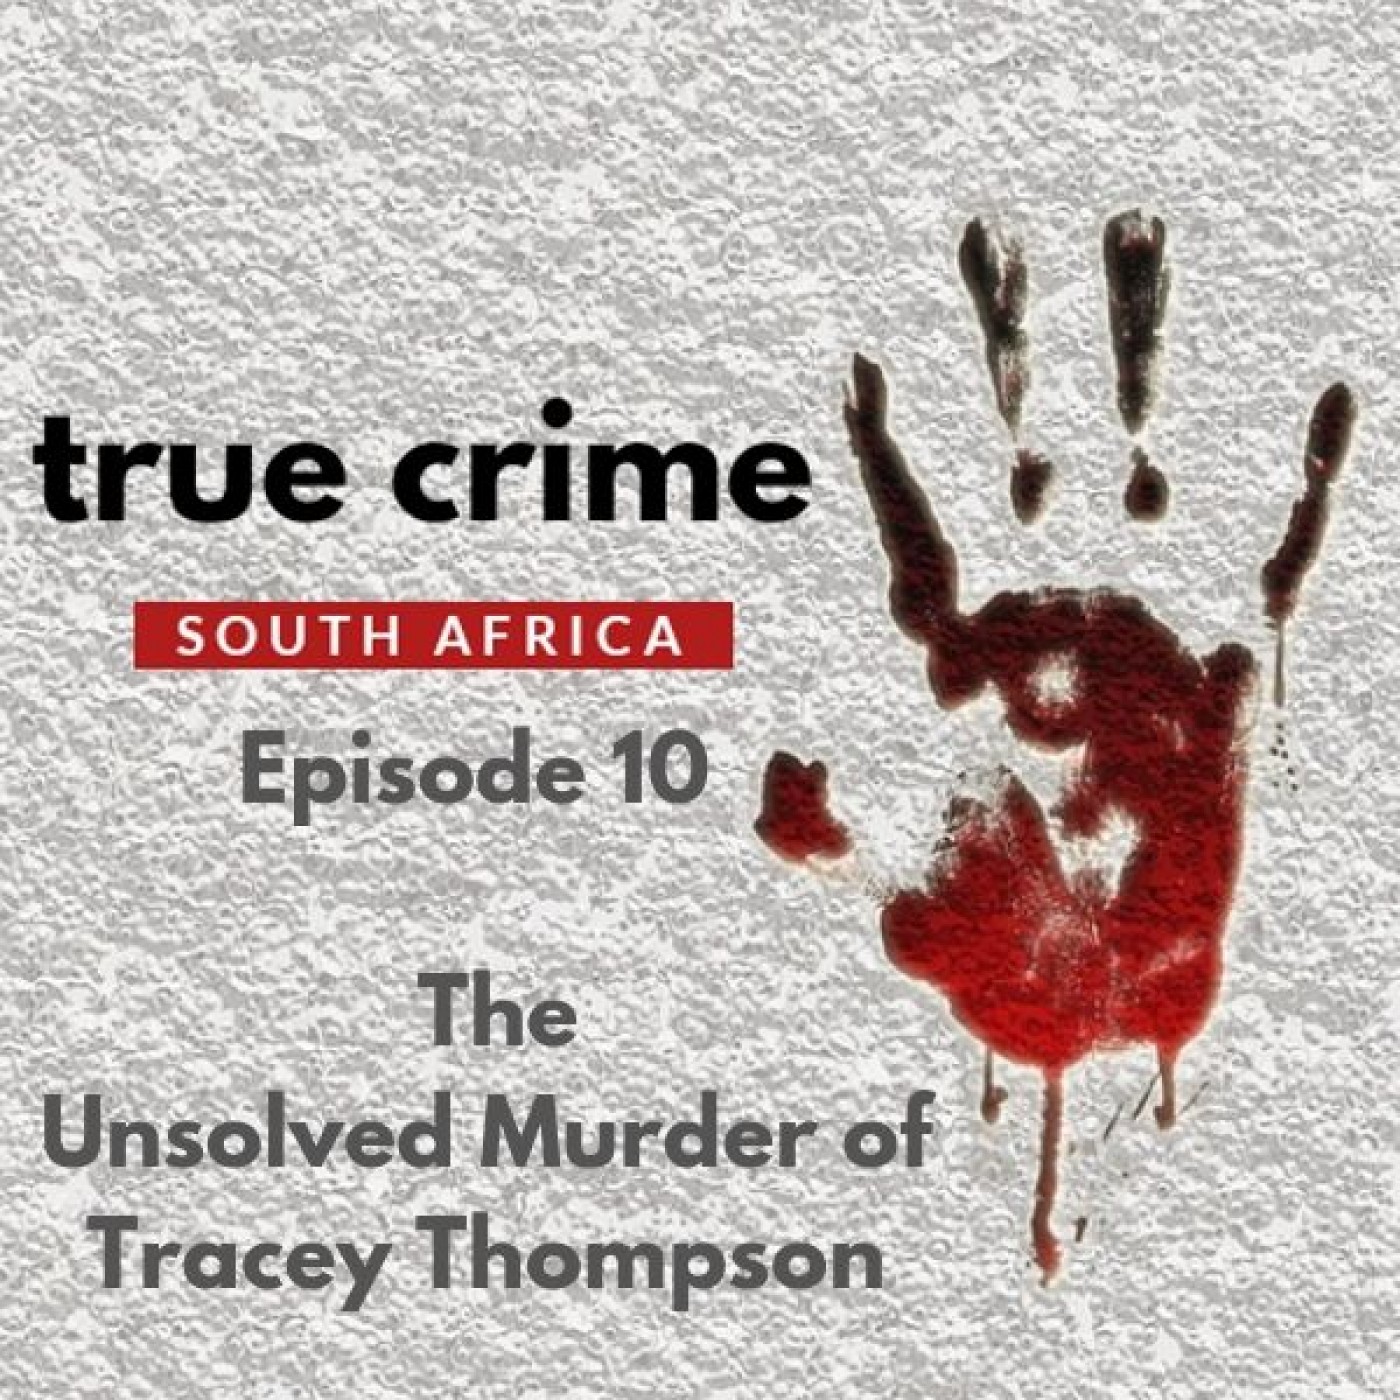 Episode 10 - The Unsolved Murder of Tracey Thompson